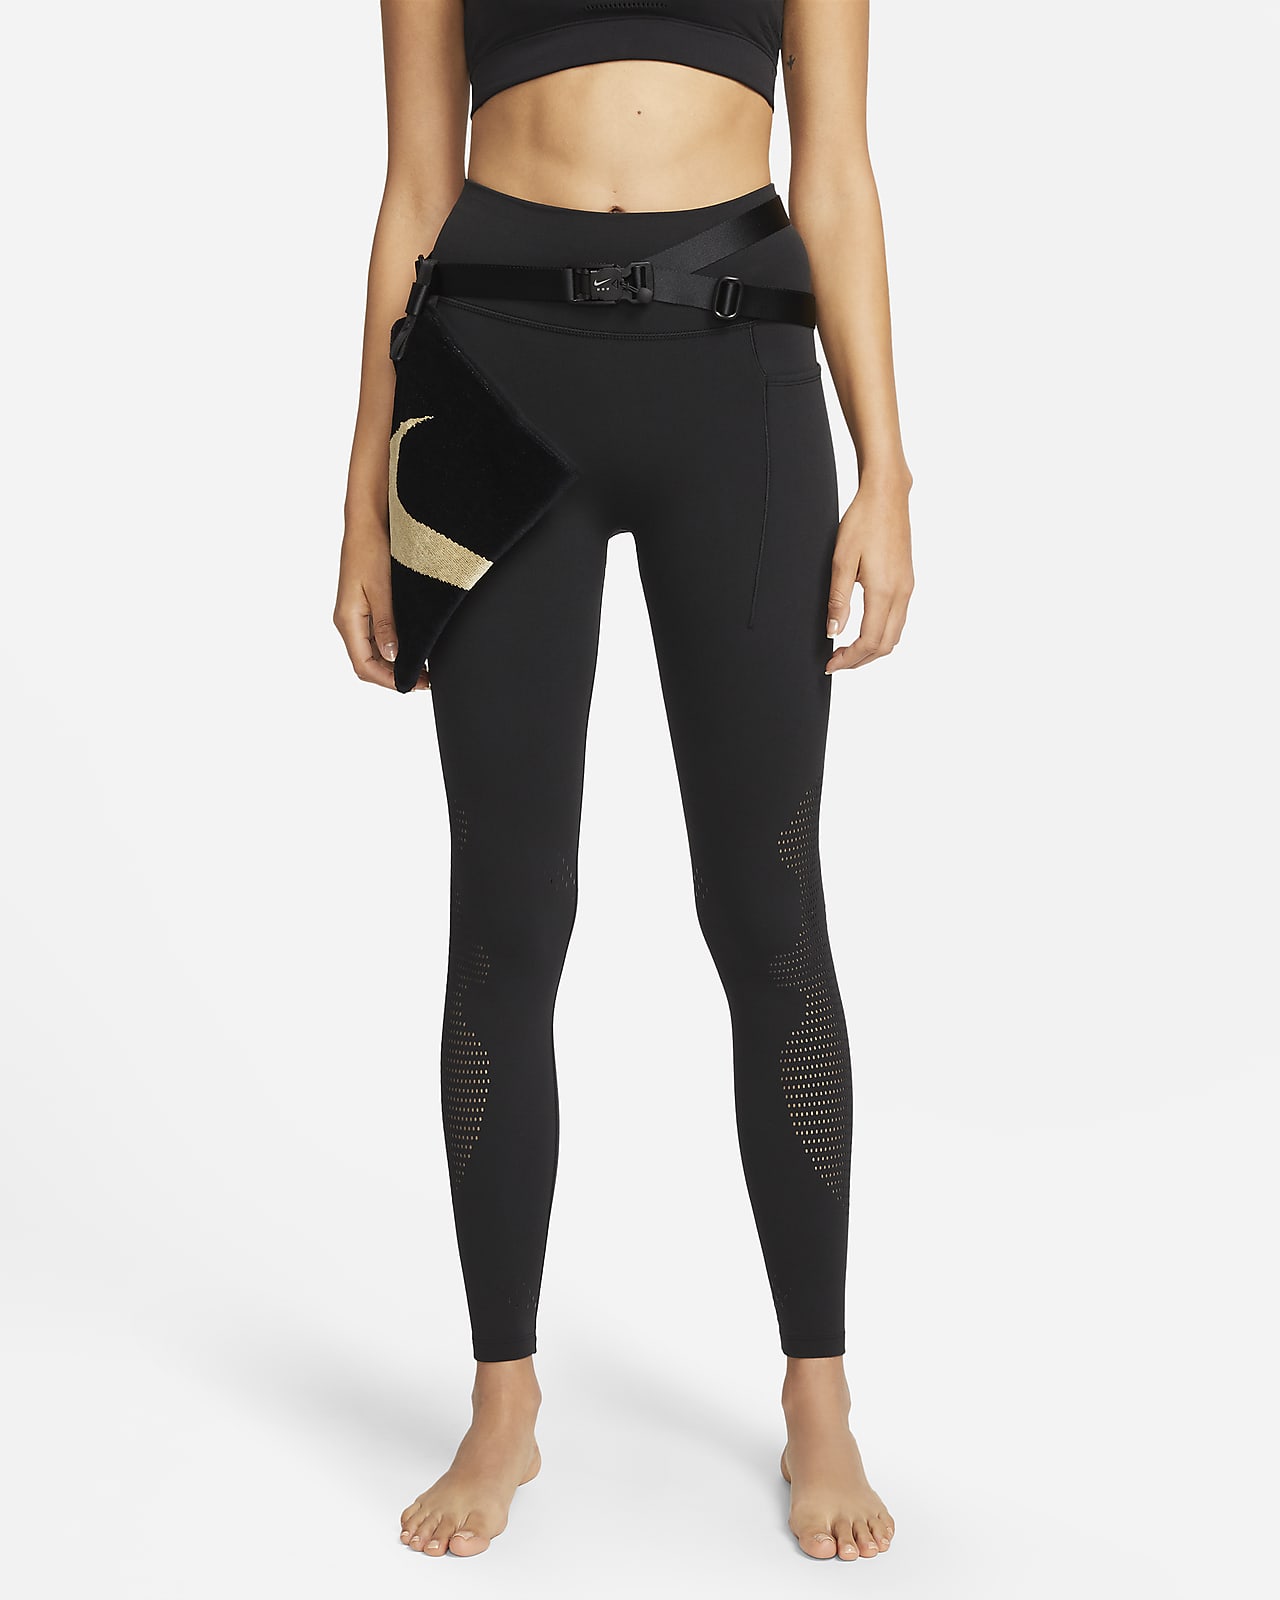 https://static.nike.com/a/images/t_PDP_1280_v1/f_auto,q_auto:eco/b40b8182-a3dc-45b3-9255-cca58d035b94/mmw-leggings-BGFD3q.png